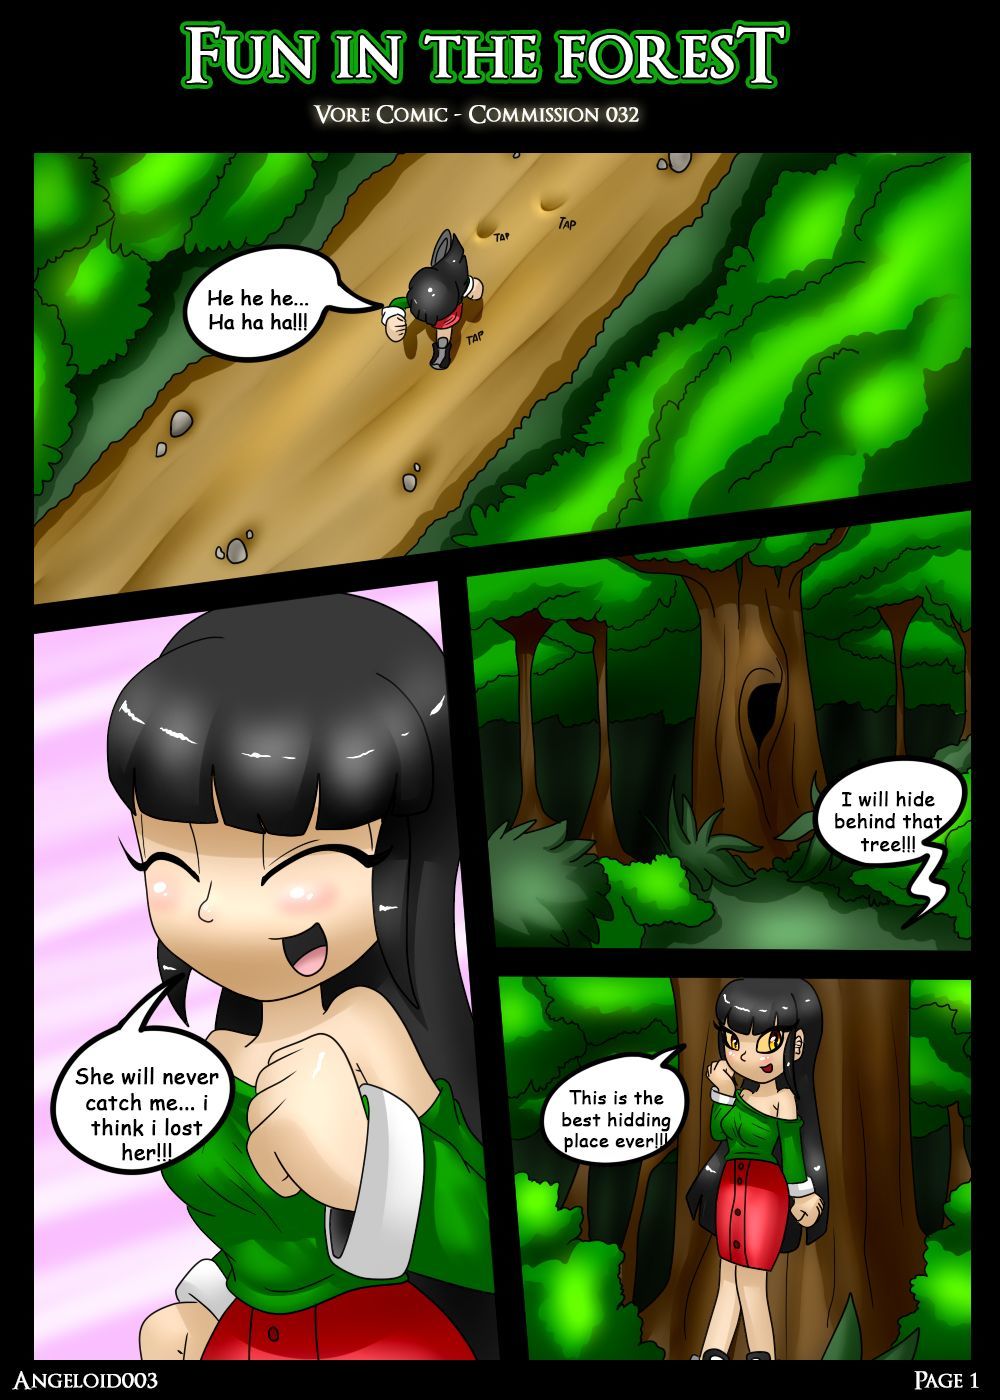 Fun in the Forest - Comm032 Angeloid003 page 1